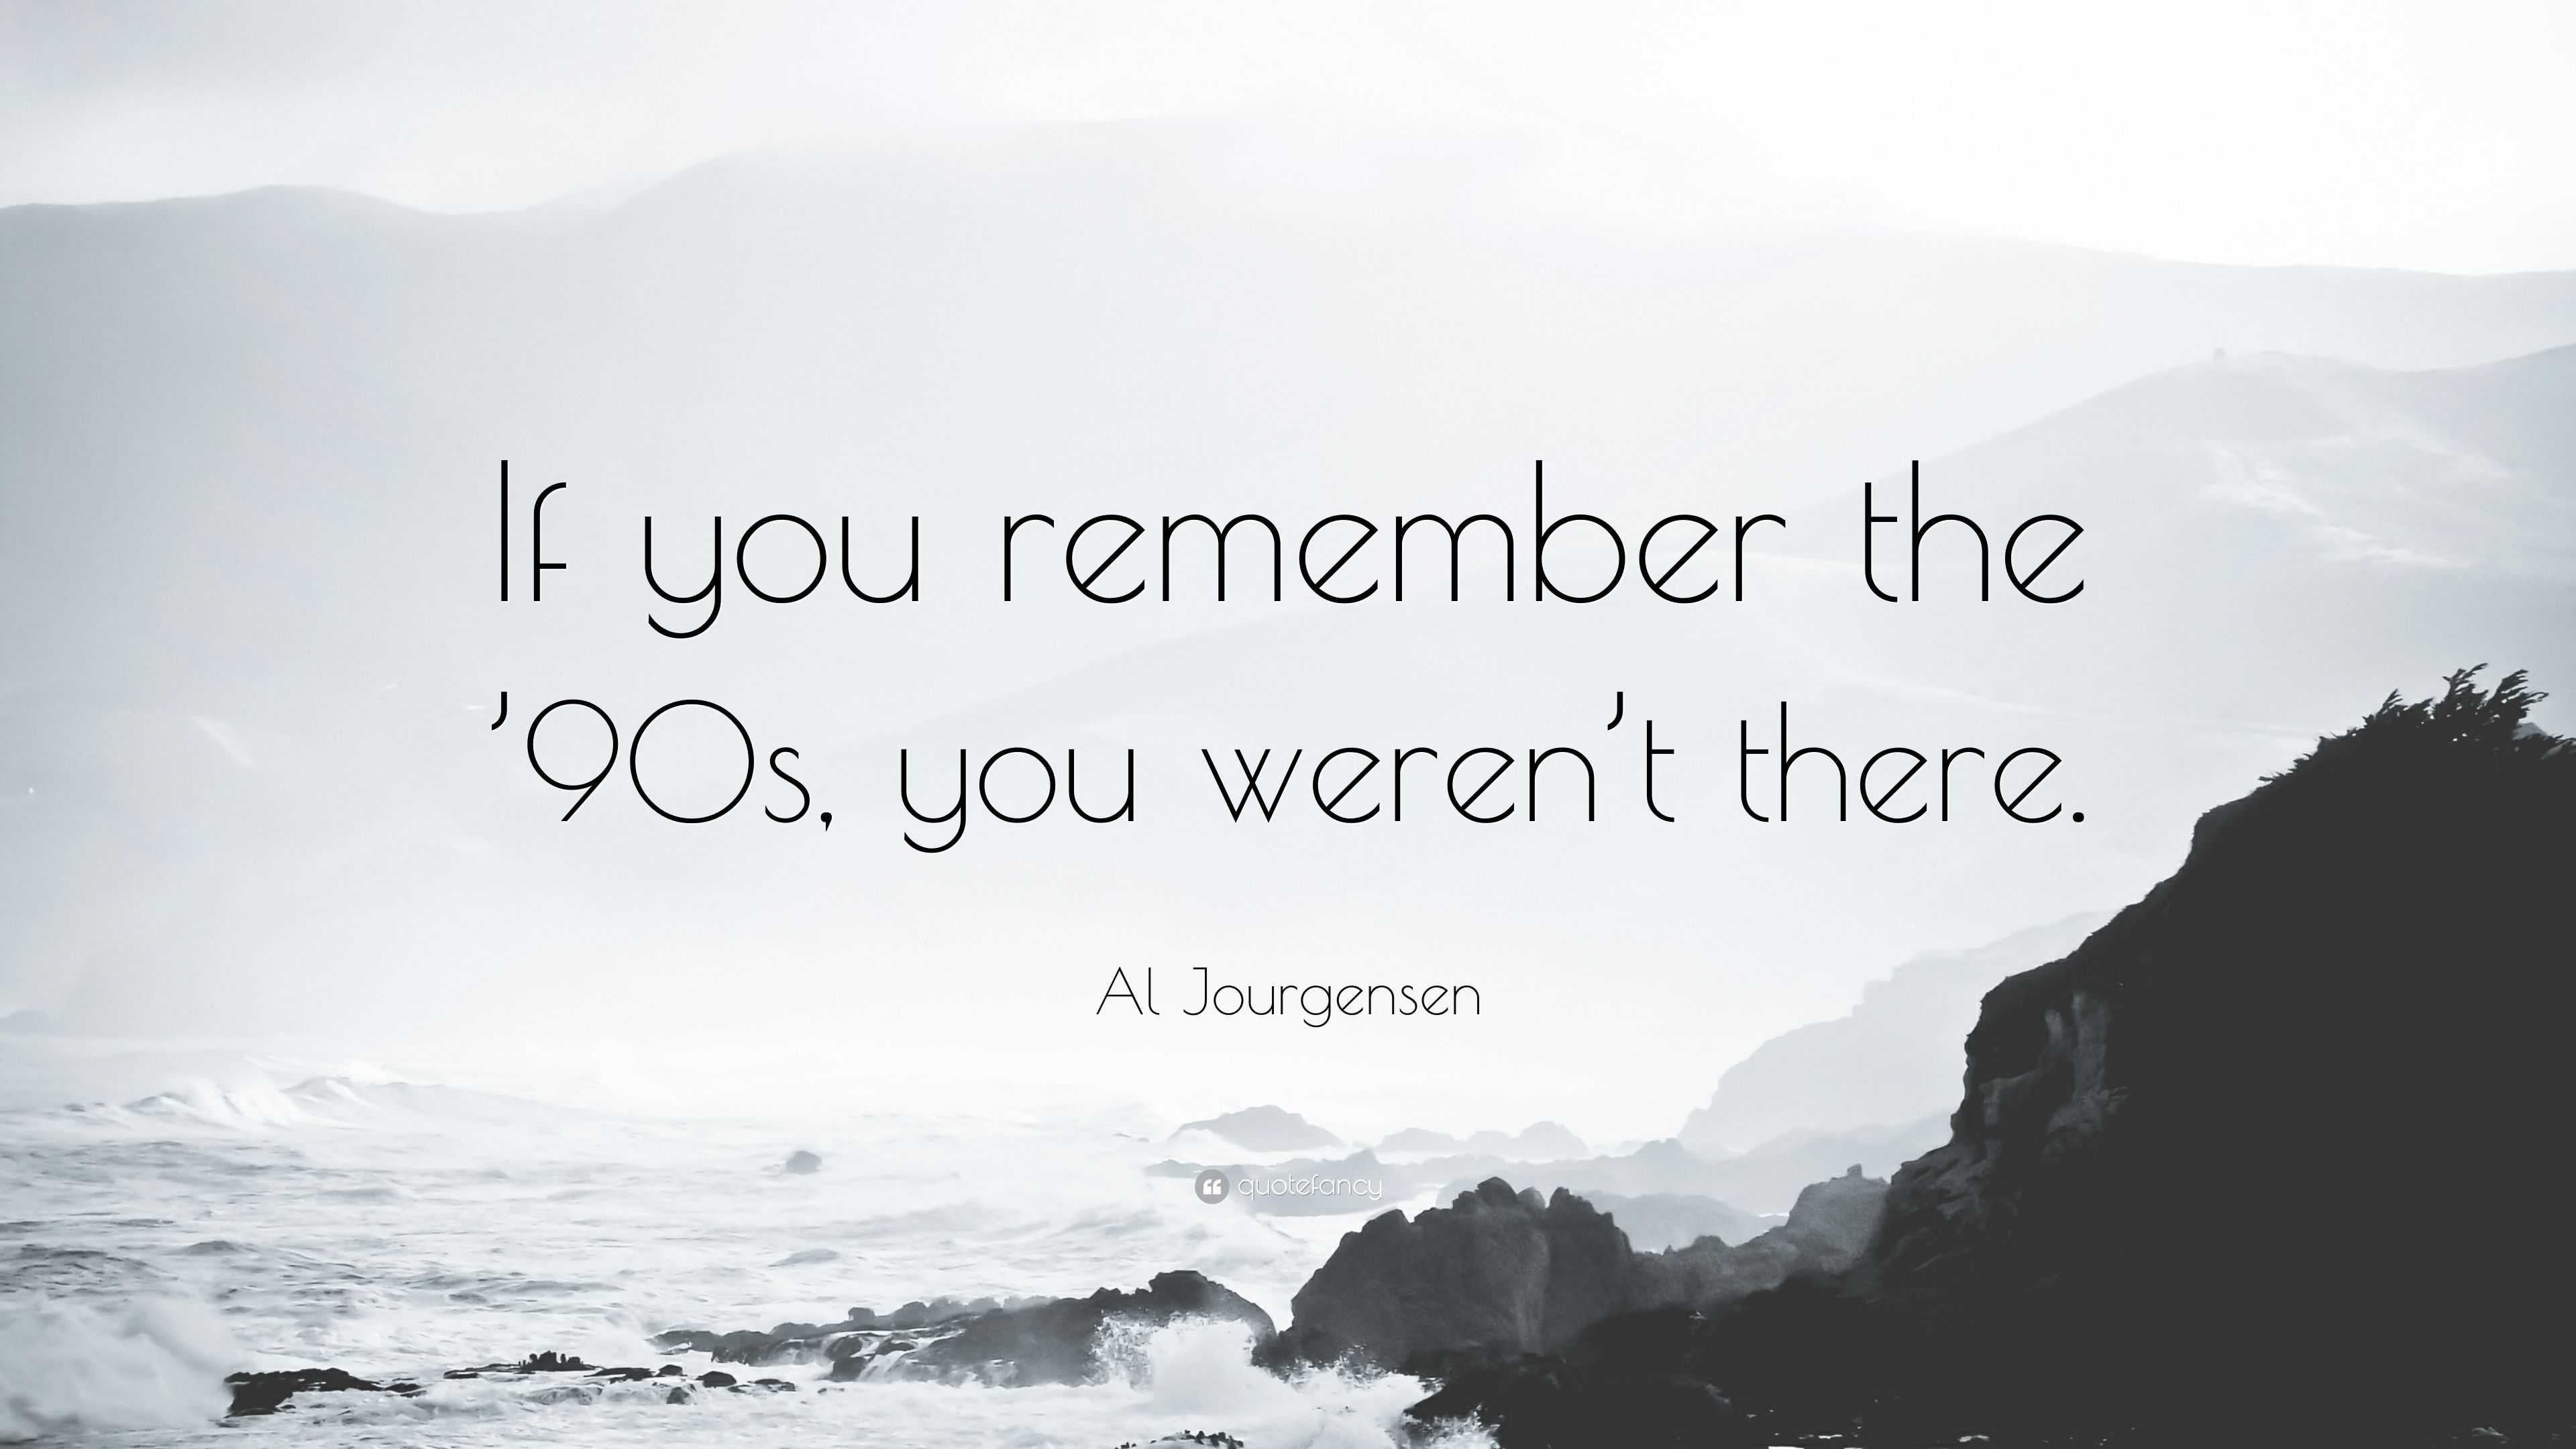 2399860 Al Jourgensen Quote If you remember the 90s you weren t there